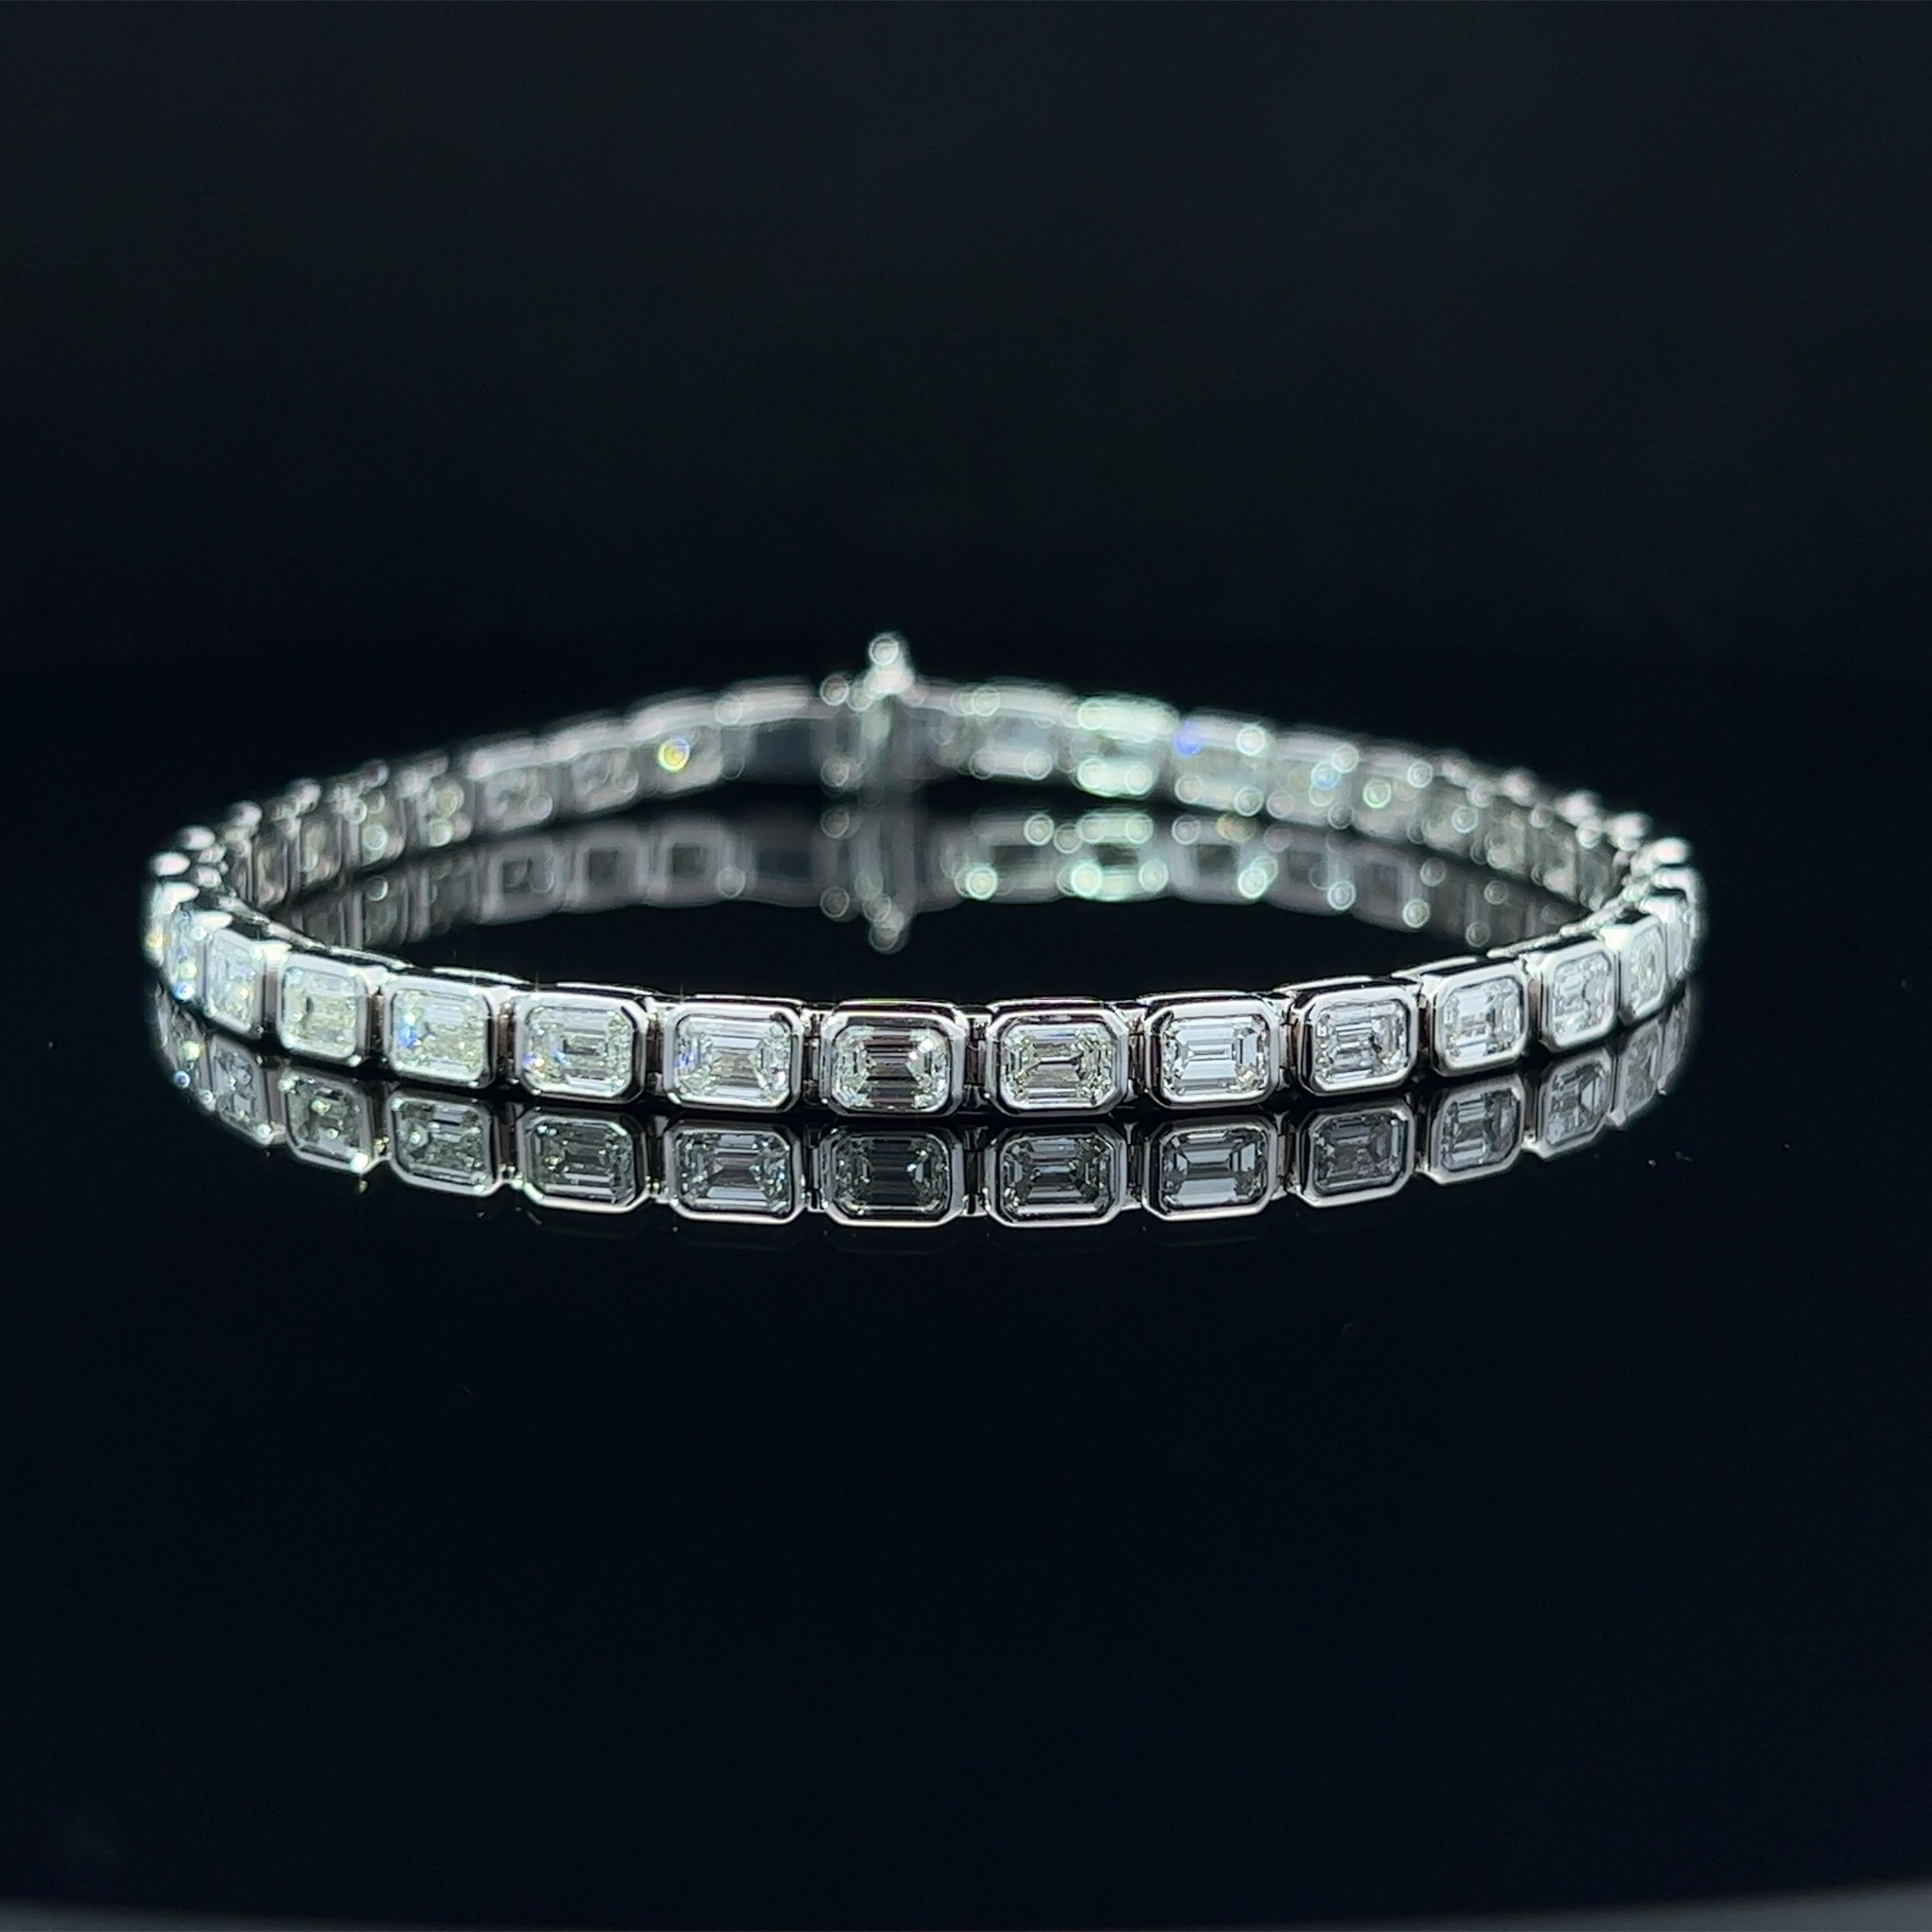 Diamond Shape: Emerald Cut   
Total Diamond Weight: 6.2ct 
Individual Diamond Weight: .20ct 
Color/Clarity: FG VVS  
Metal: 18K White Gold 
Metal Weight: 13.98g

Key Features:

Emerald-Cut Diamonds: The centerpiece of this bracelet consists of a